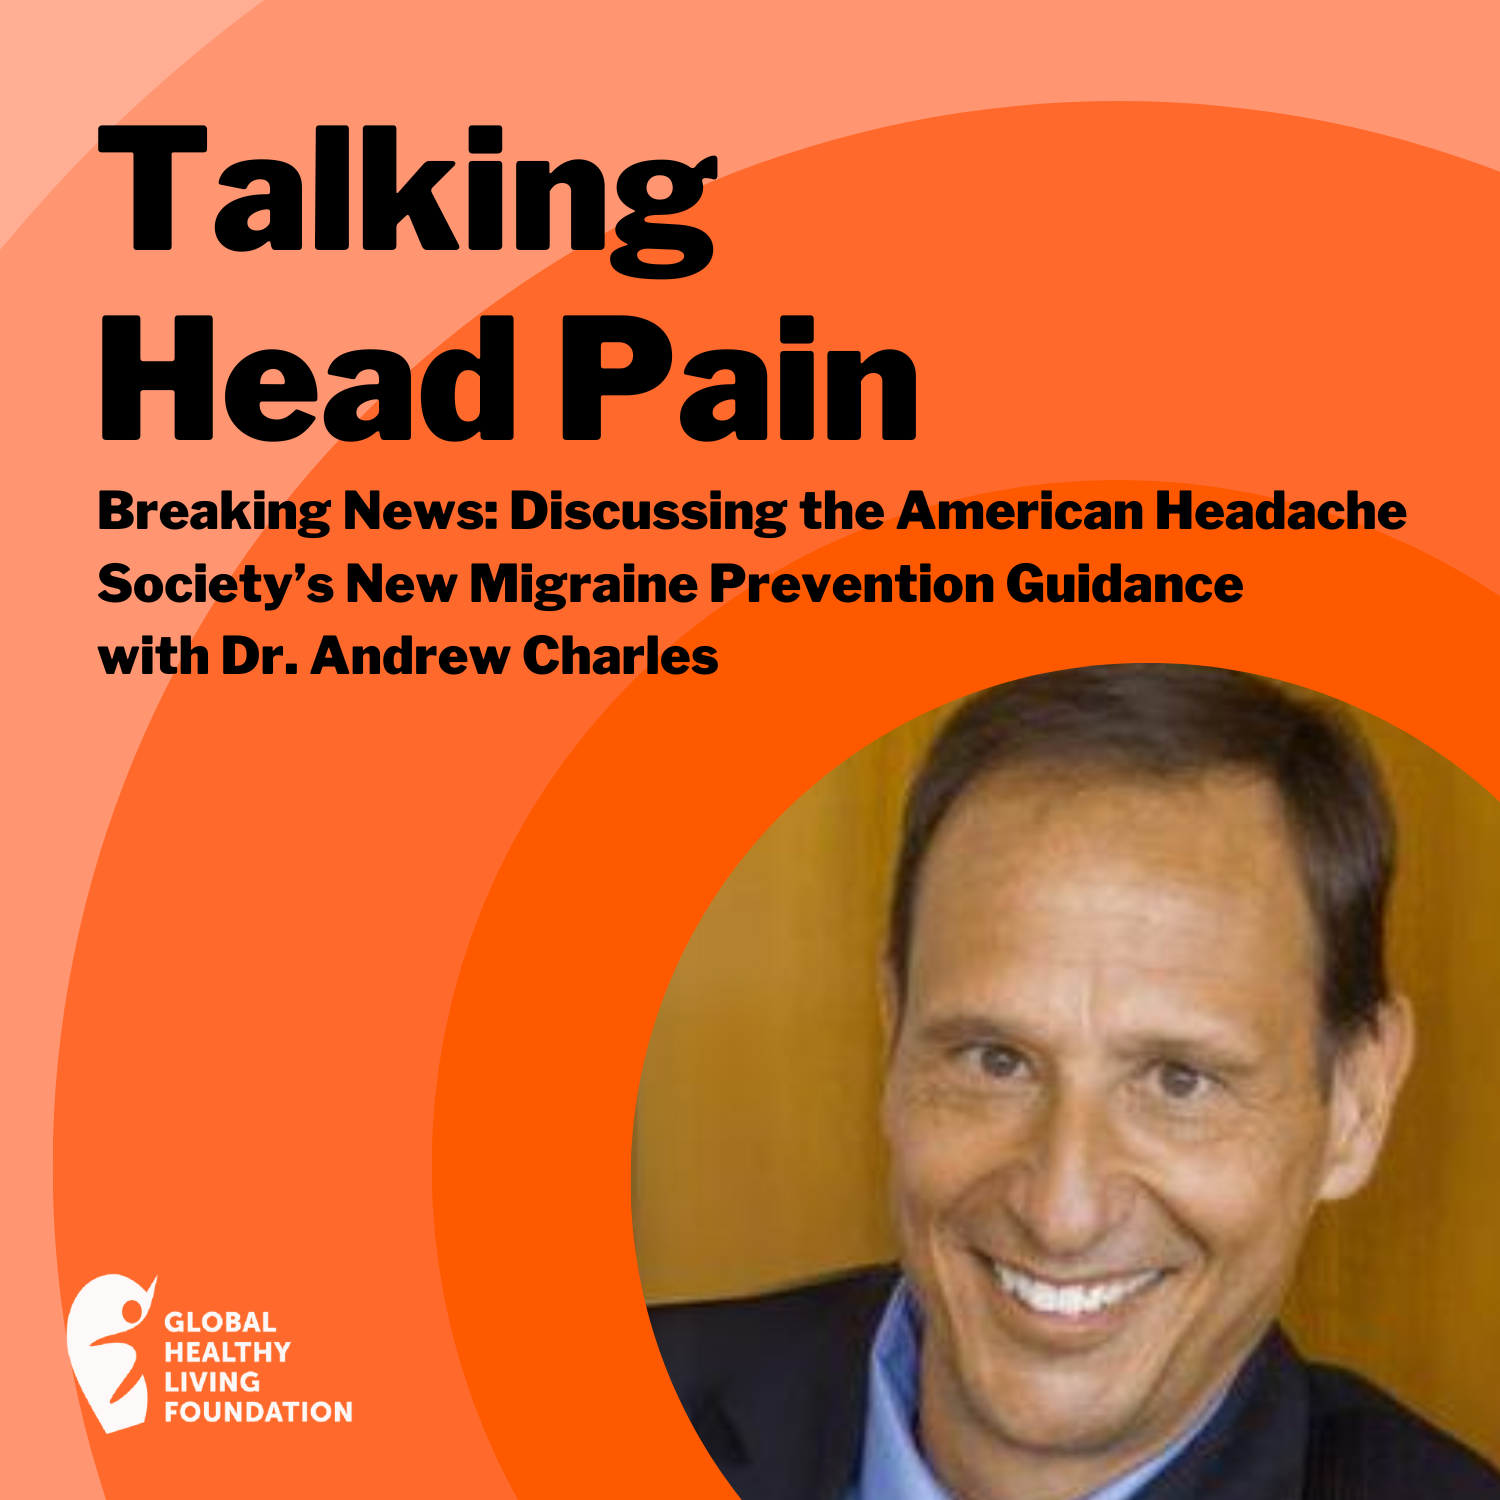 Breaking News: Discussing the American Headache Society’s New Migraine Prevention Guidance with Dr. Andrew Charles